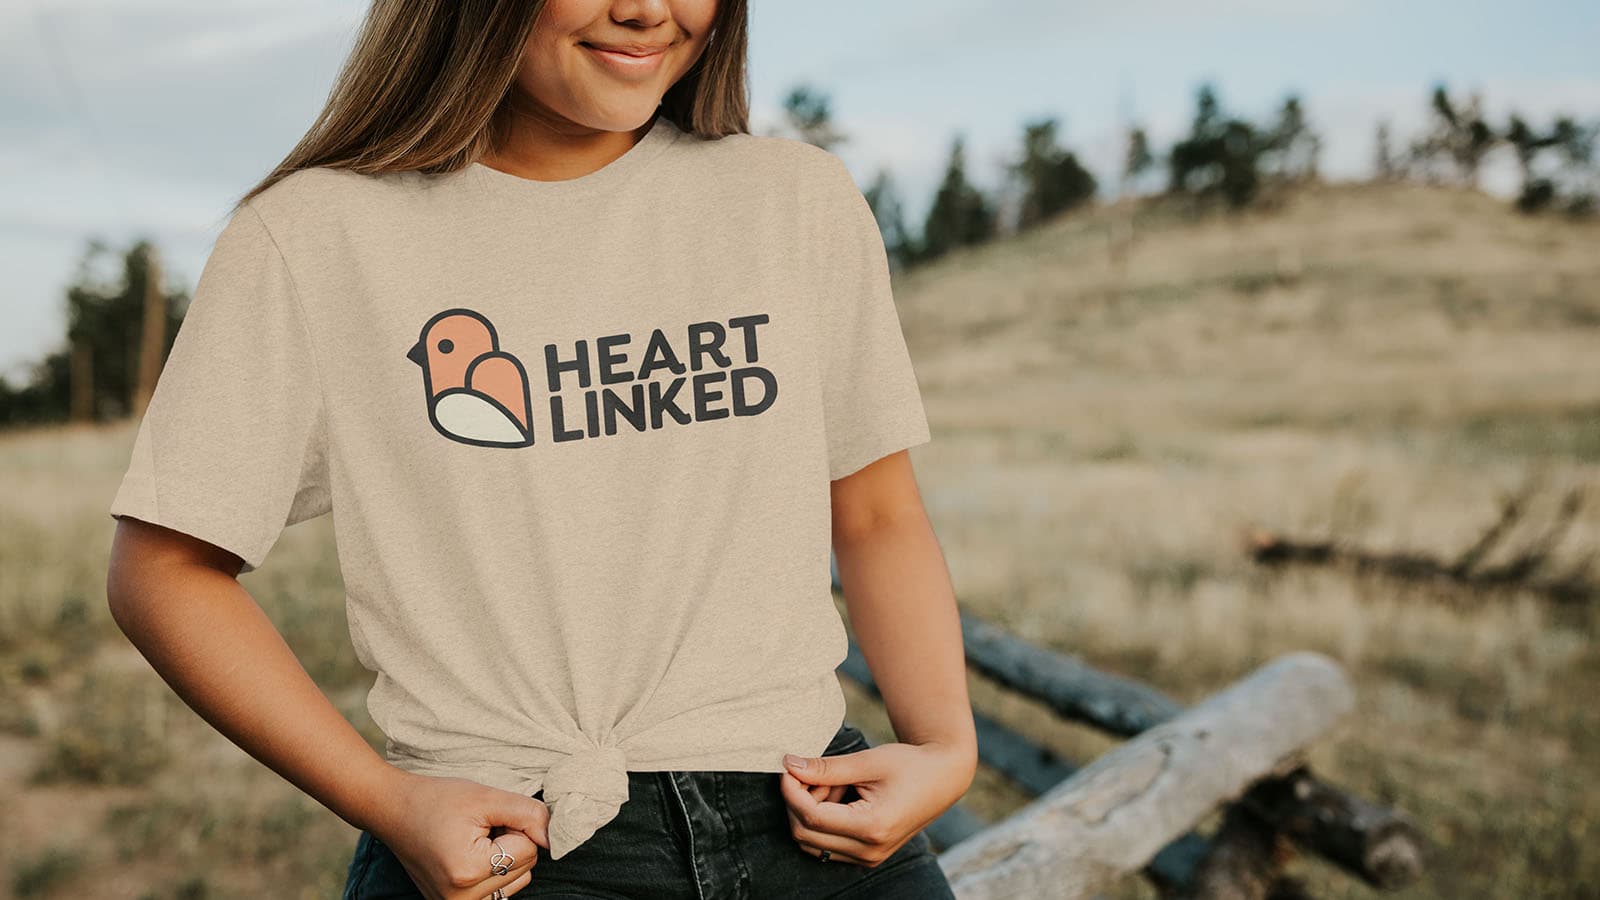 Heart Linked: Empowering a life-changing organization with a compelling new brand